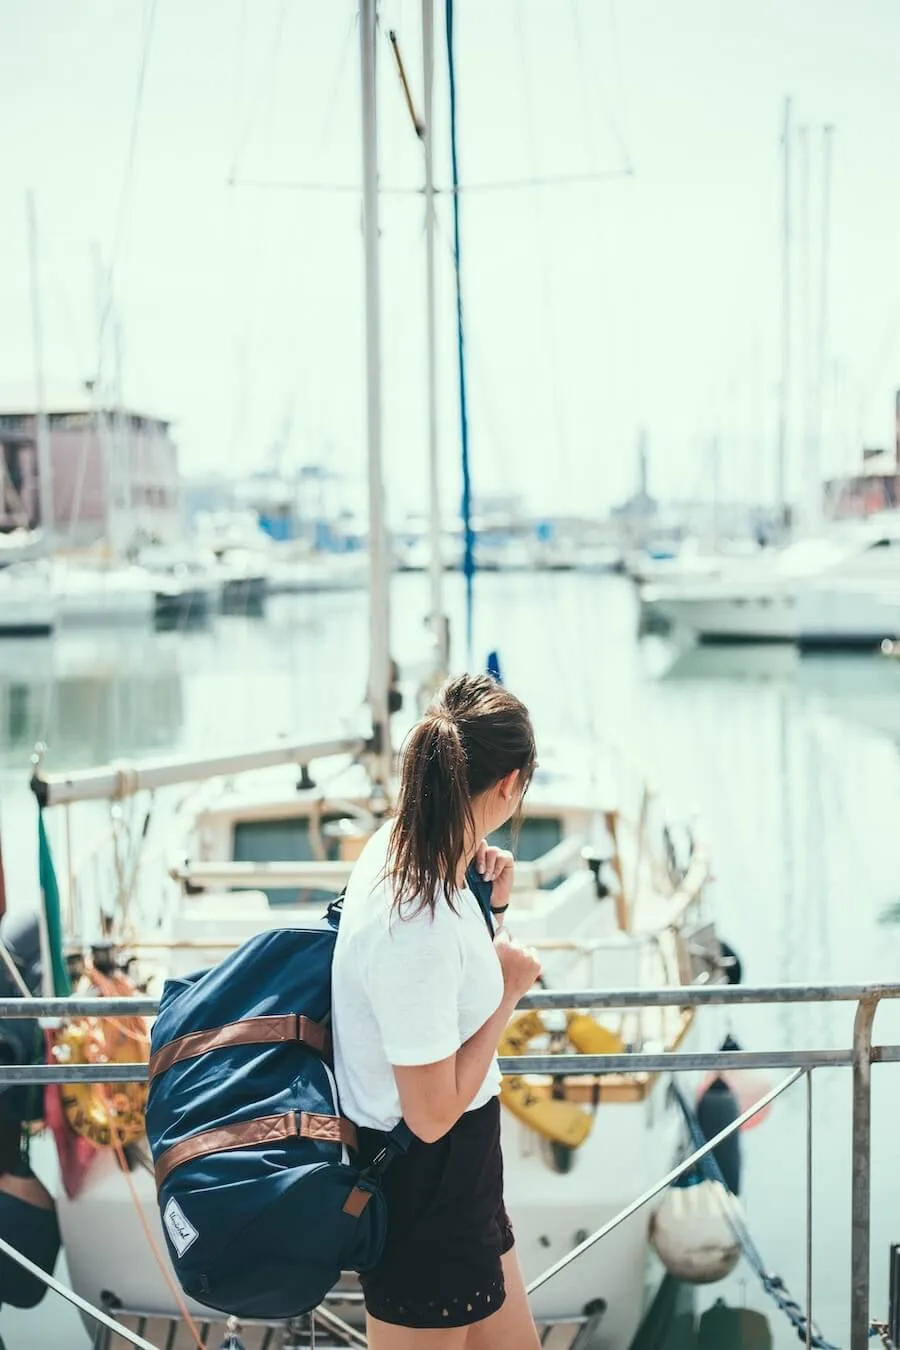 Women's Travel Essentials List image of a woman holding a large duffel bag over her shoulder while standing above a marina looking out at the water and the yachts below.